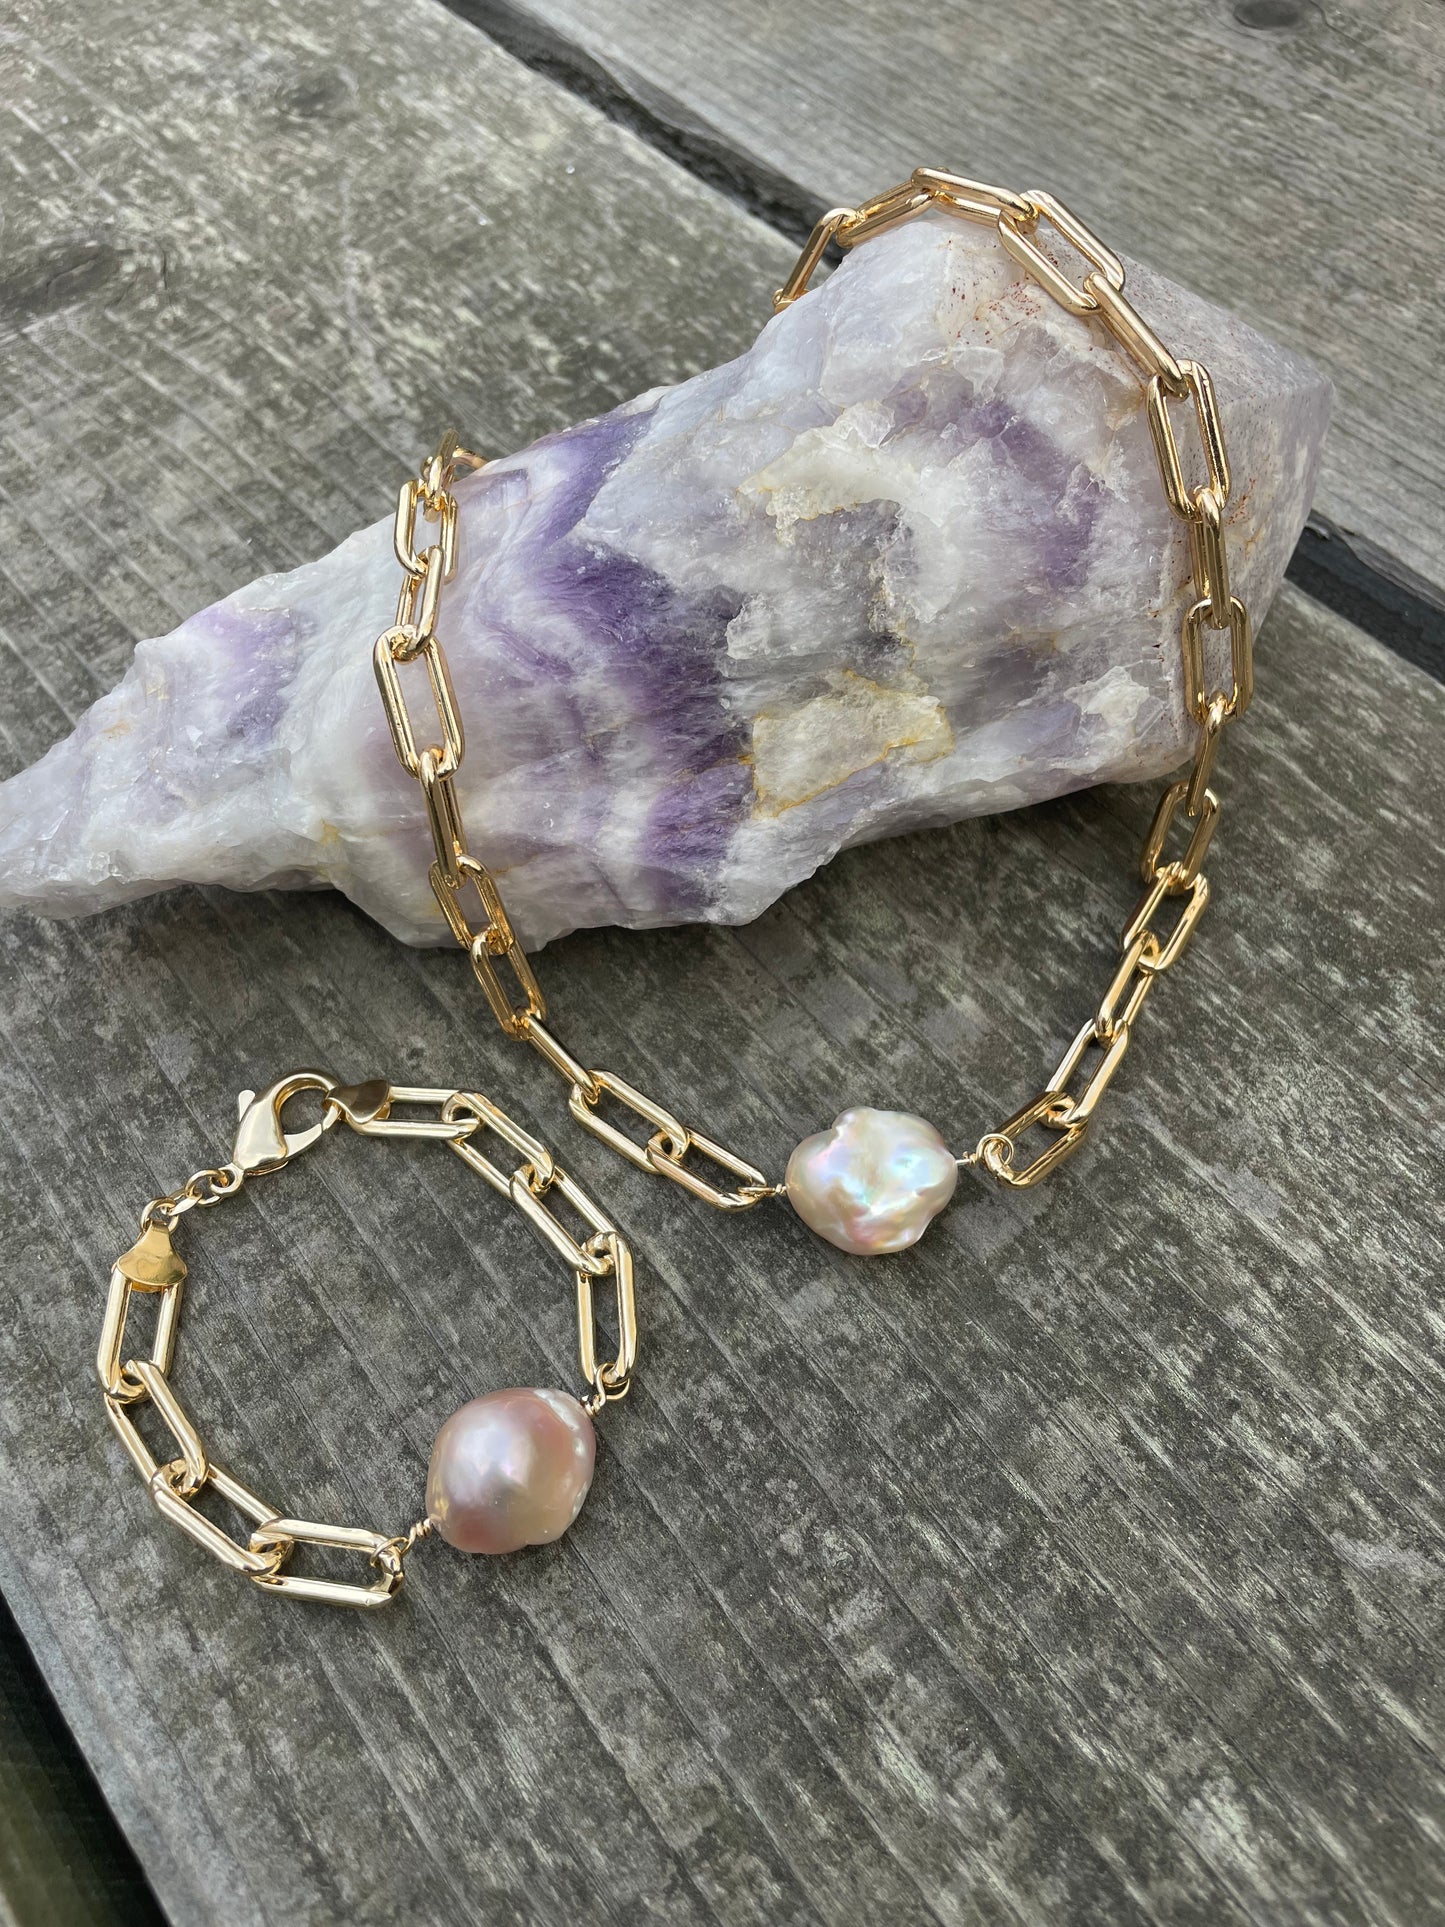 A large purple crystal with a bracelet and necklace draped off of it. Both are large link gold chains with a single large baroque pearl in the center on a wooden background.